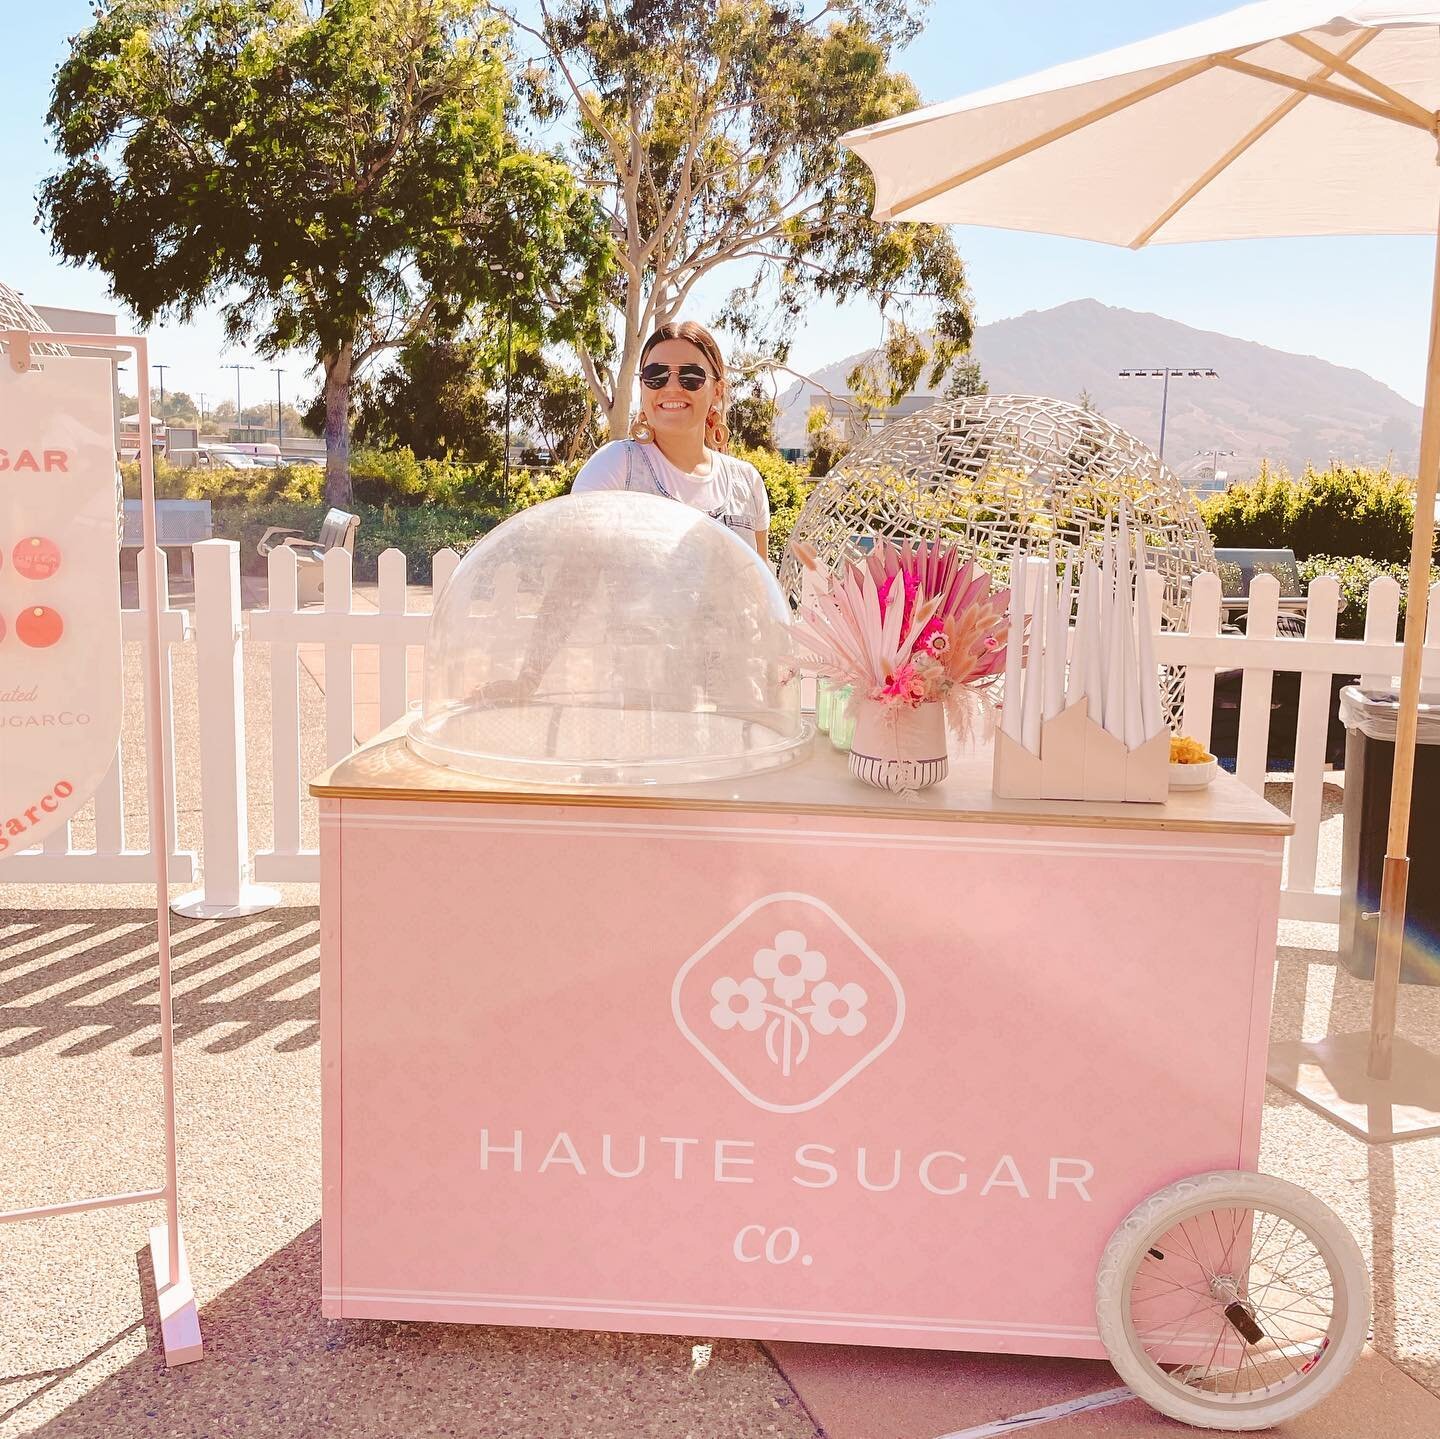 There she is! Our Pink Lady Cotton Candy Cart spinning the cutest candy around! 🍬🌸 We just realized she hasn&rsquo;t made an appearance on the IG feed in a haute sec - phew! 

.
.
.
.
.
#cottoncandy #candy #sweets #dessert #events #catering #cateri